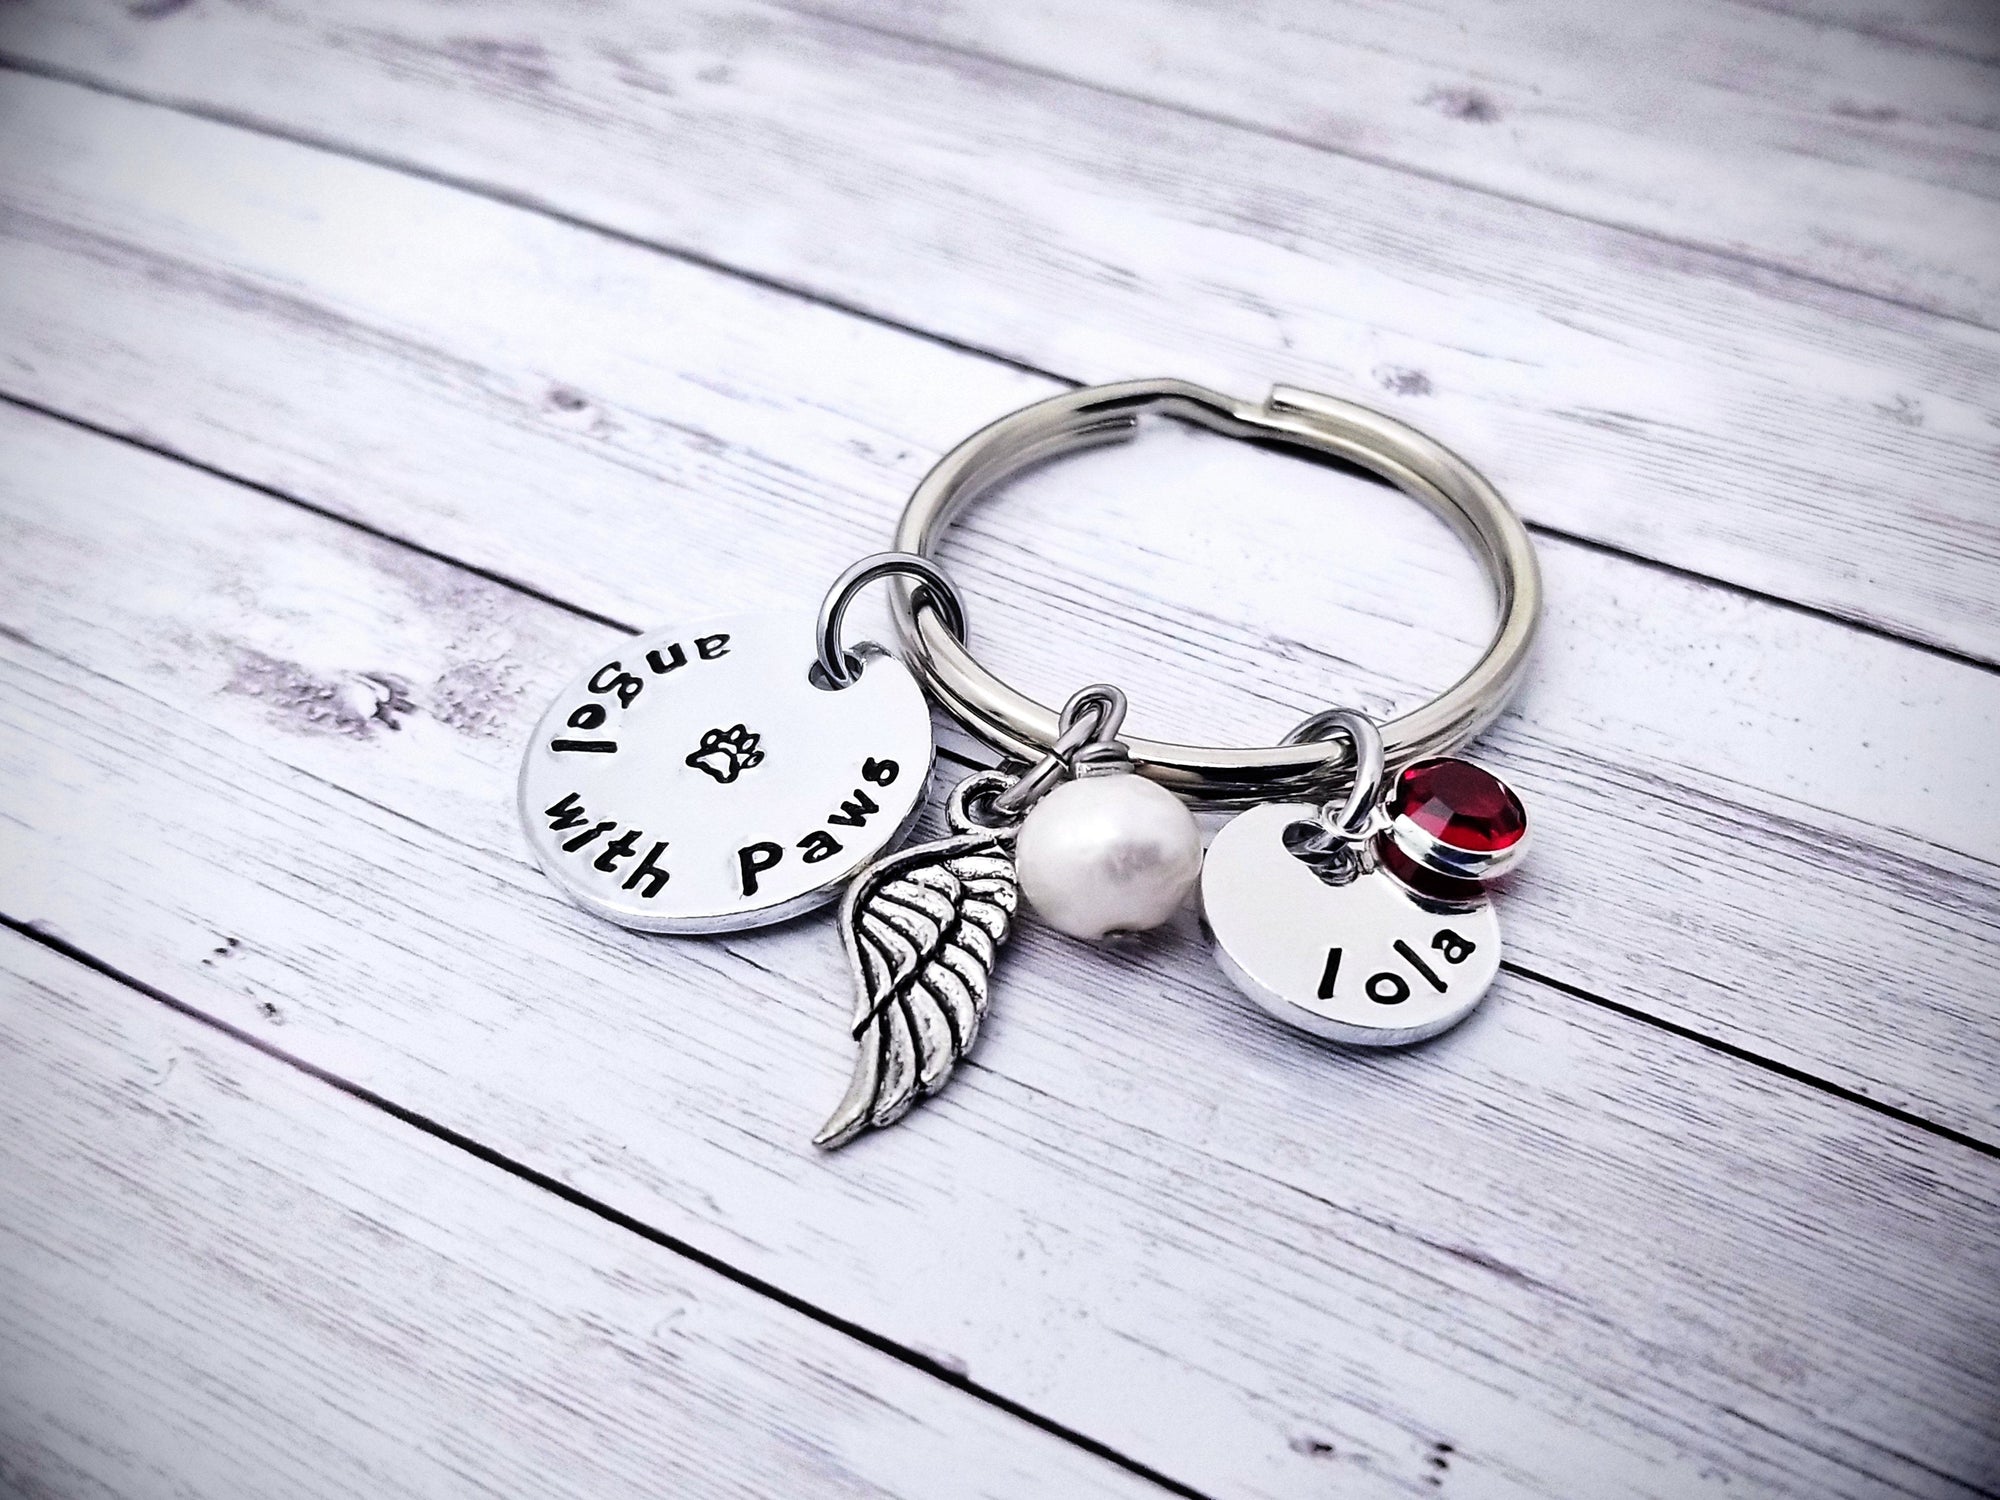 Pet Memorial Keychain, Paw Print on my Heart, Angel With Paws, Family Pet loss, Lost Pet, Pet Remembrance, Rainbow Bridge Gift